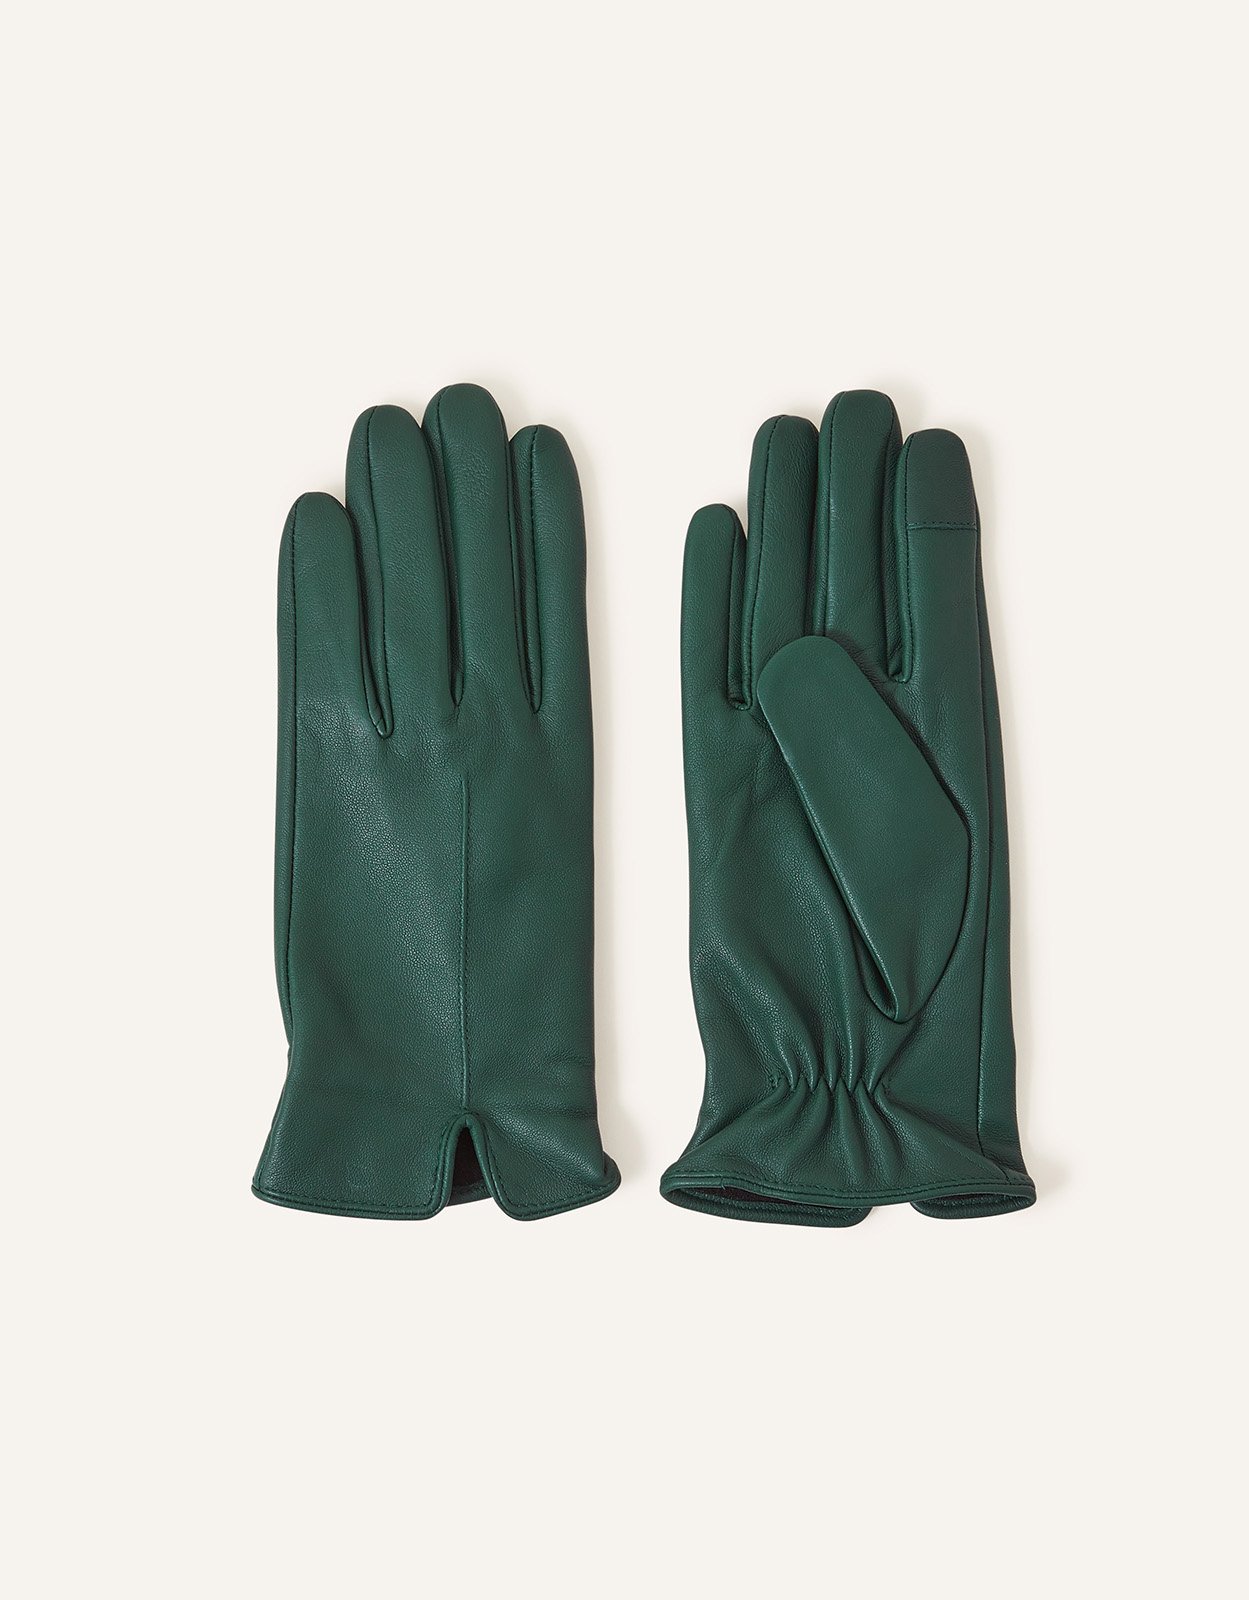 Accessorize Touchscreen Leather Gloves Green